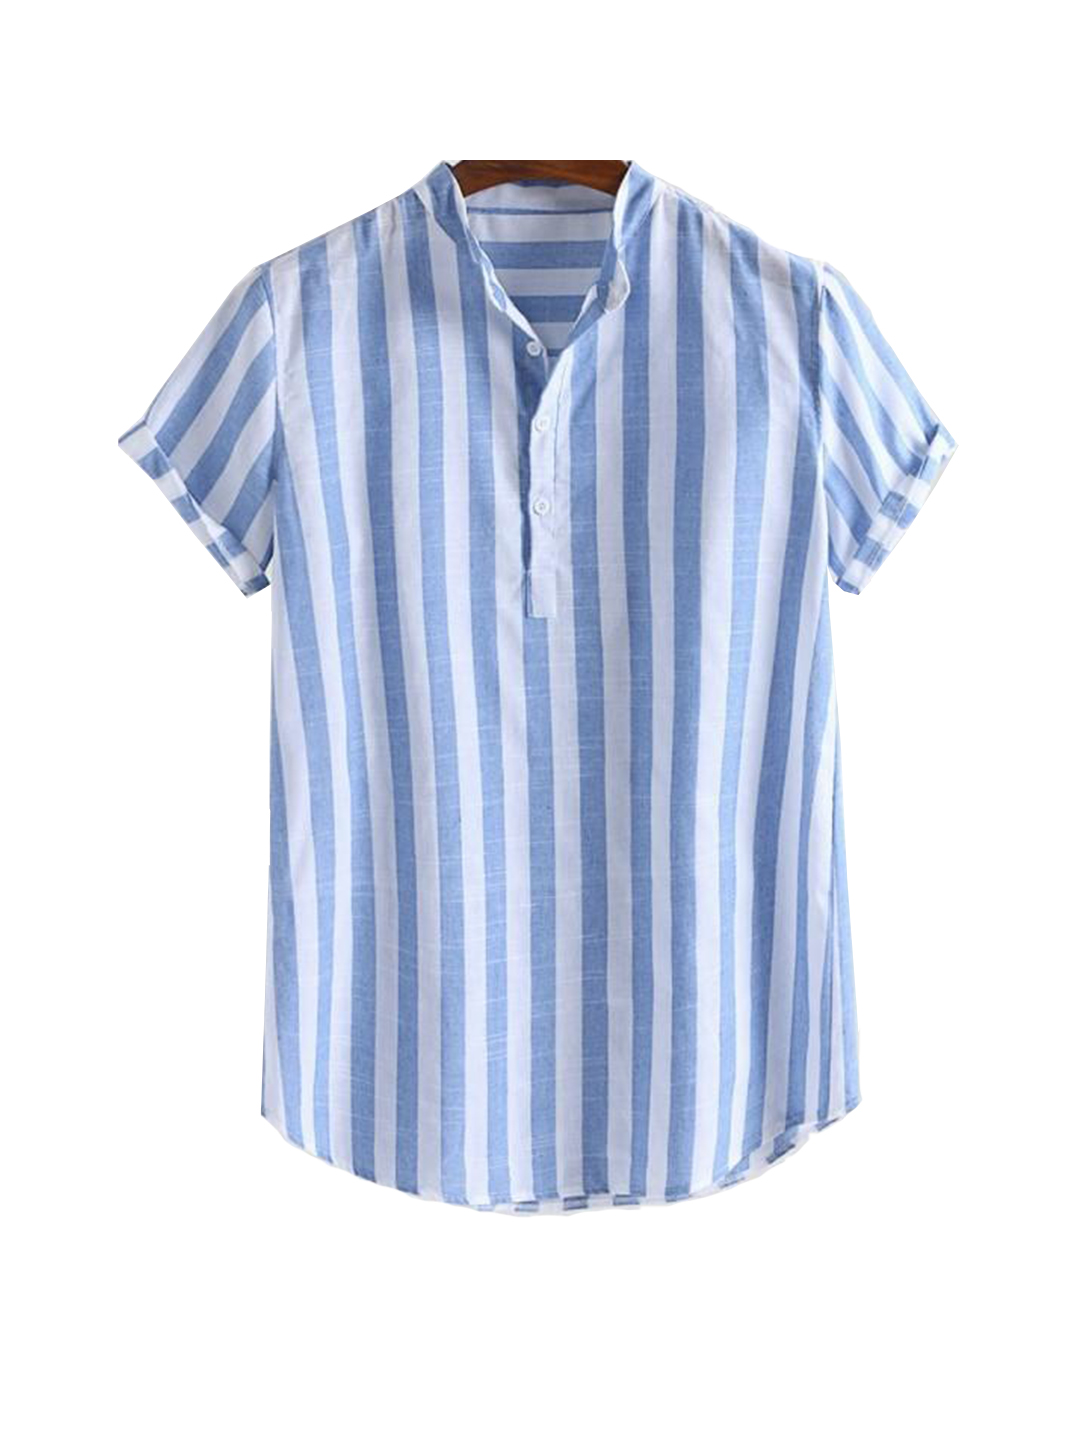 Arrowood Blue Striped Stand Collar Casual Shirt